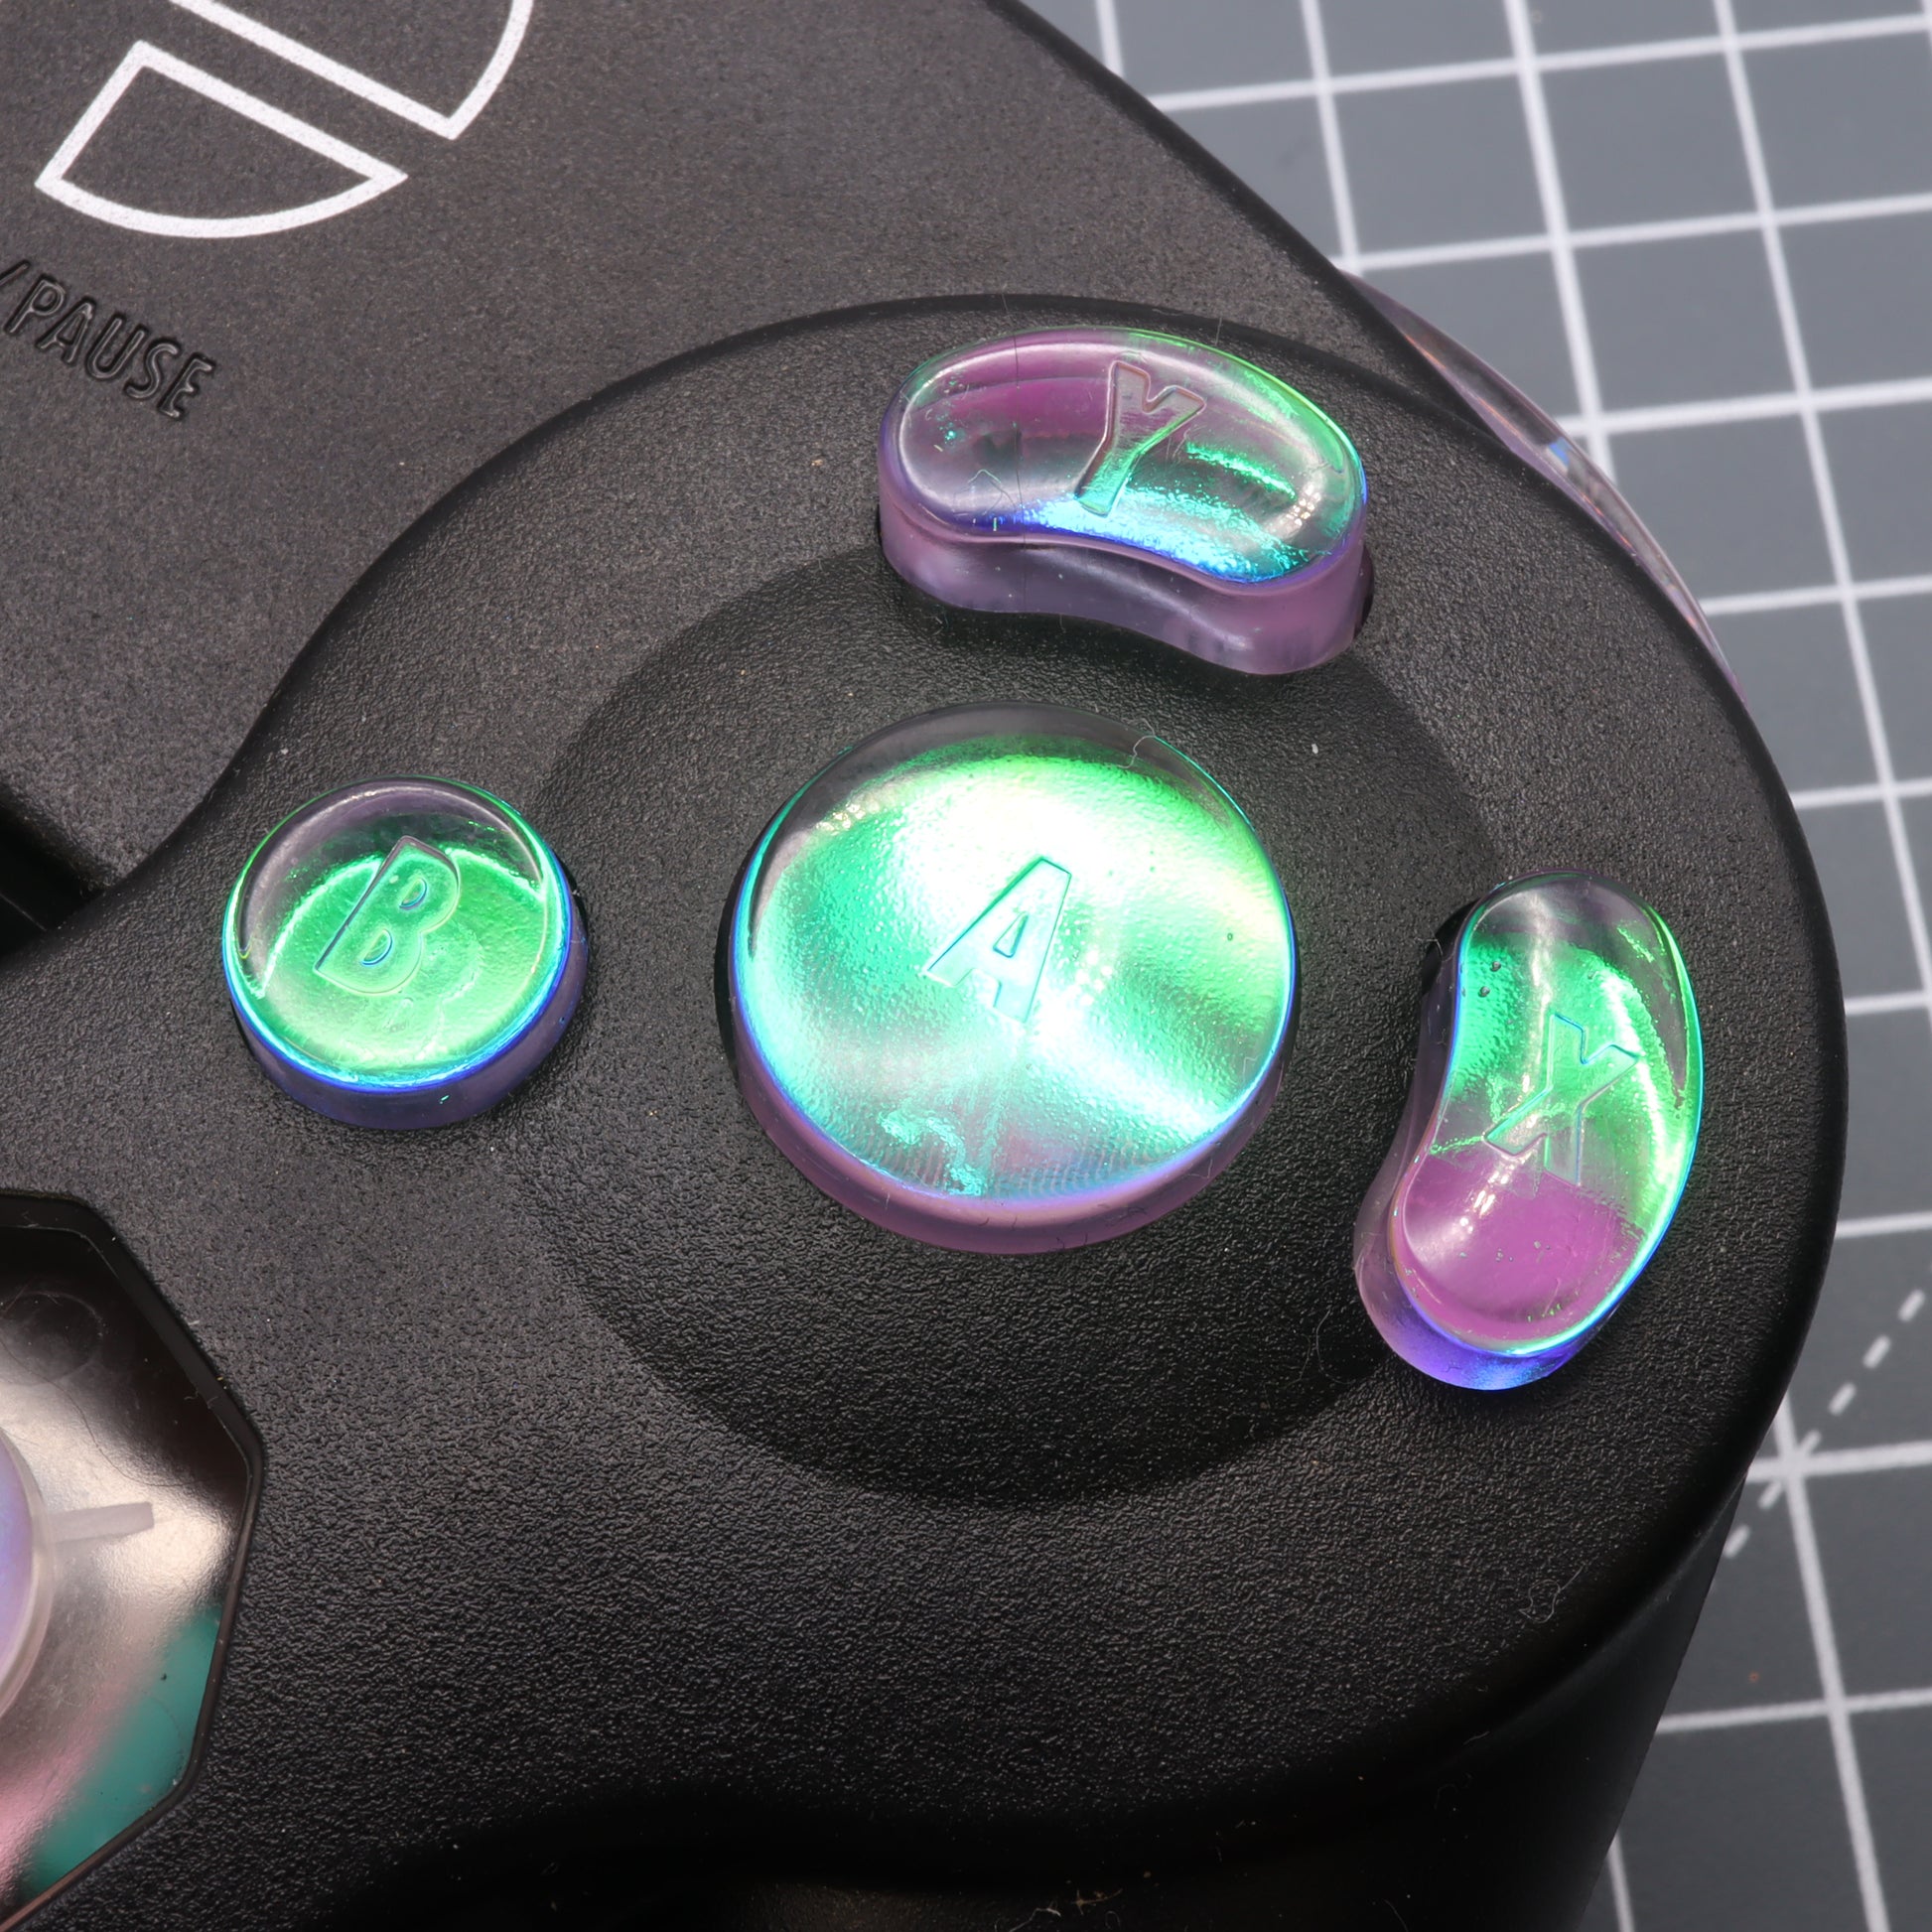 A close-up of a GameCube - Custom Button - Cool Opal controller's colorful abxy buttons with a reflective, dichroic effect.